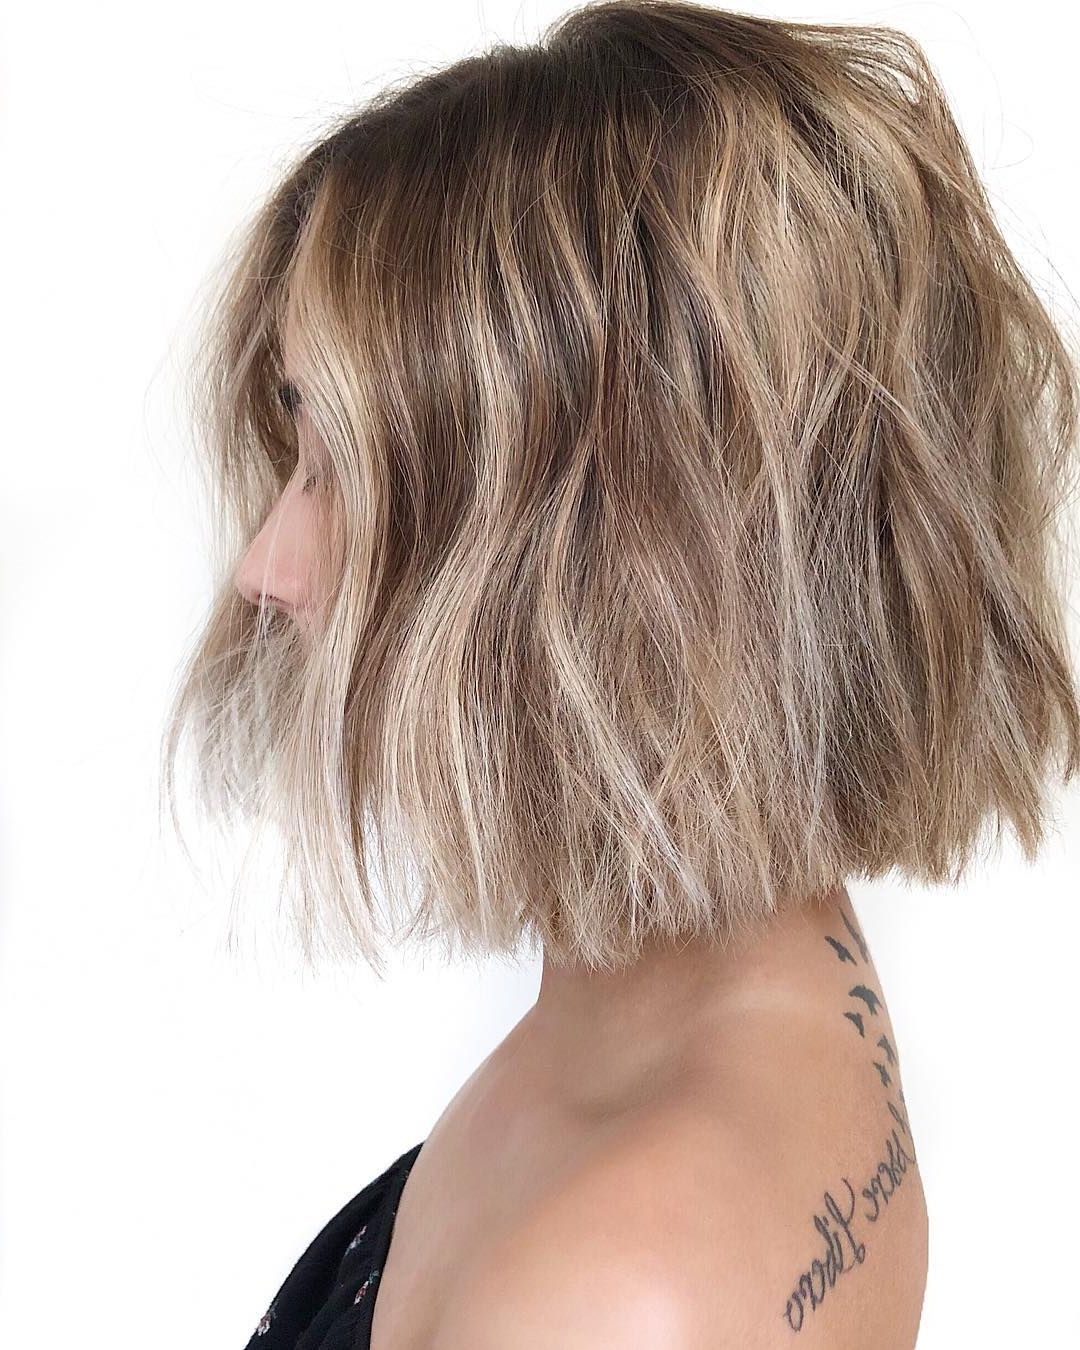 Most Recent Short Messy Bob Hairstyles Regarding 10 Trendy Messy Bob Hairstyles And Haircuts, 2019 Female Short Hair (View 2 of 20)